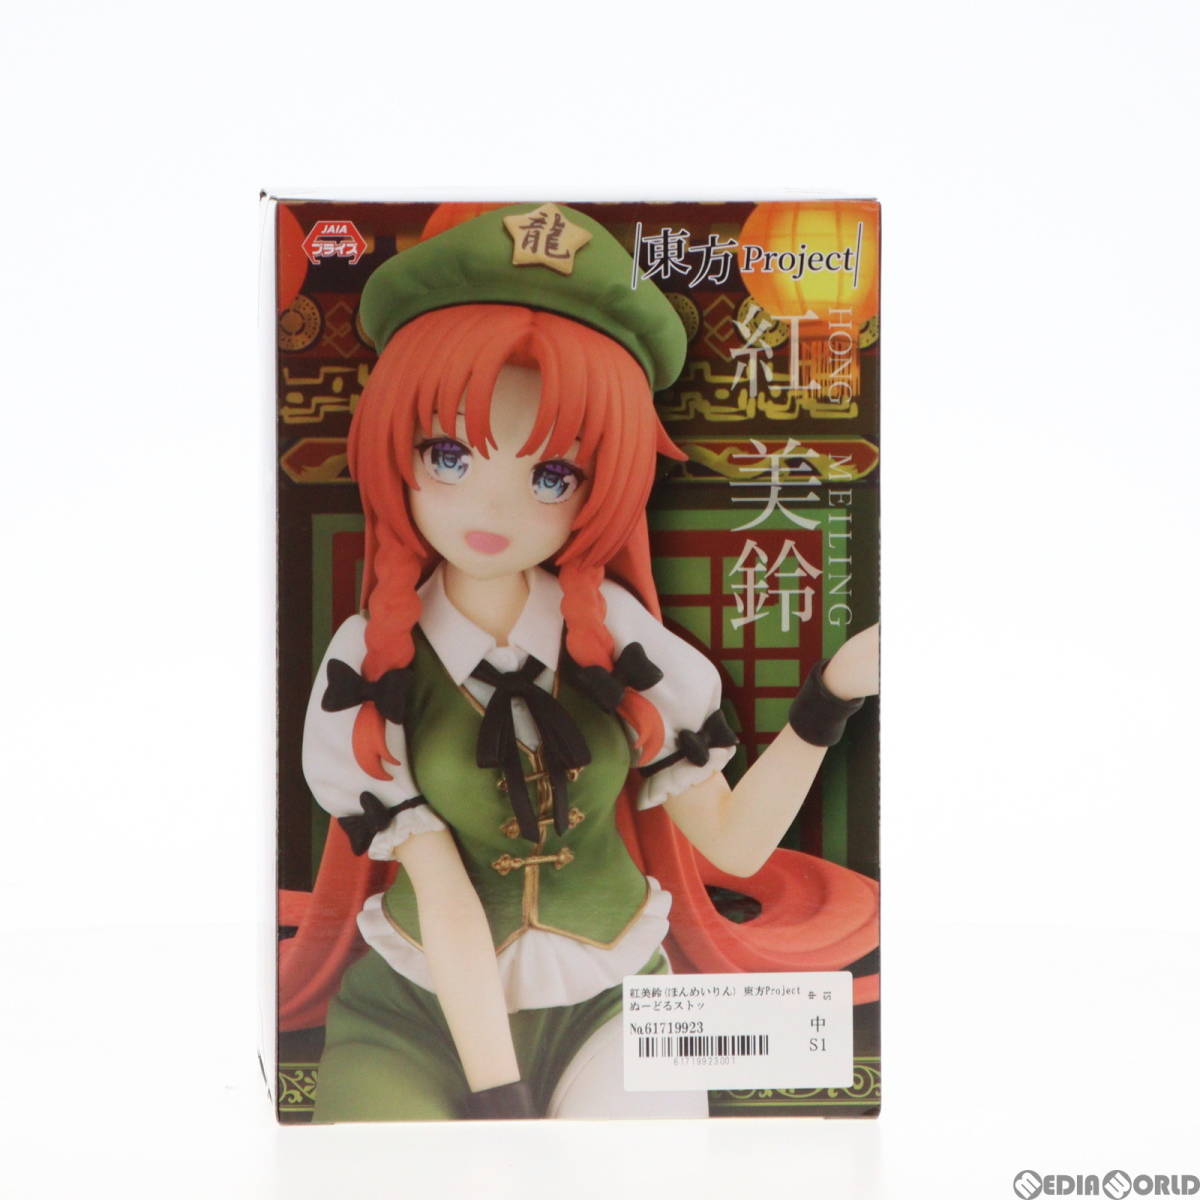 [ used ][FIG]. beautiful bell (.... rin ) higashi person Project.-.. stopper figure -. beautiful bell - prize (AMU-PRZ15402)f dragon (61719923)